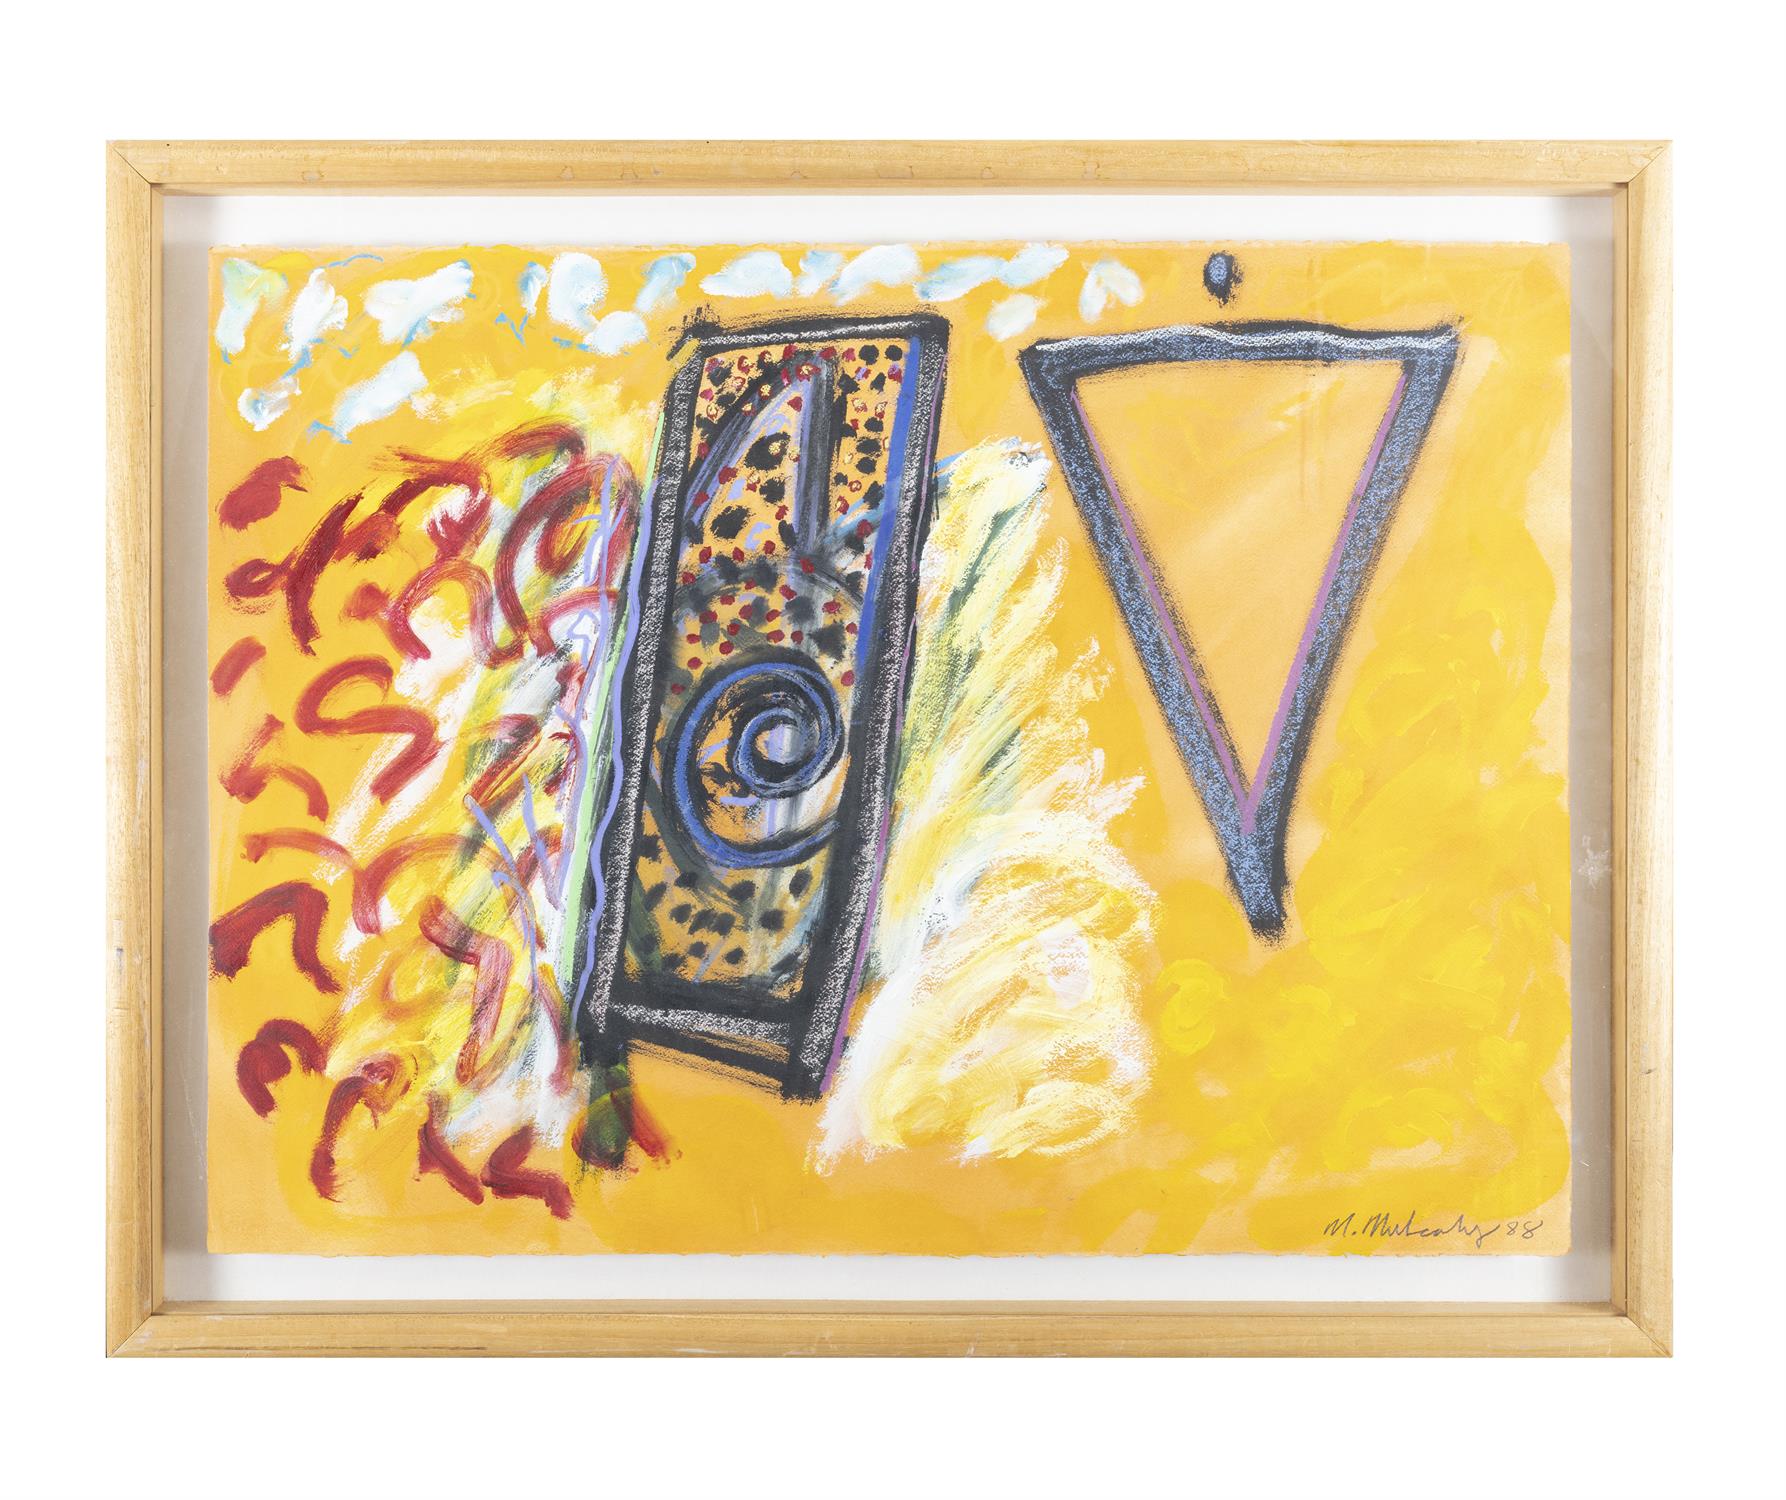 Michael Mulcahy (b.1952) Dugon Door Mixed media, 54 x 75cm Signed and dated '88 - Image 2 of 4